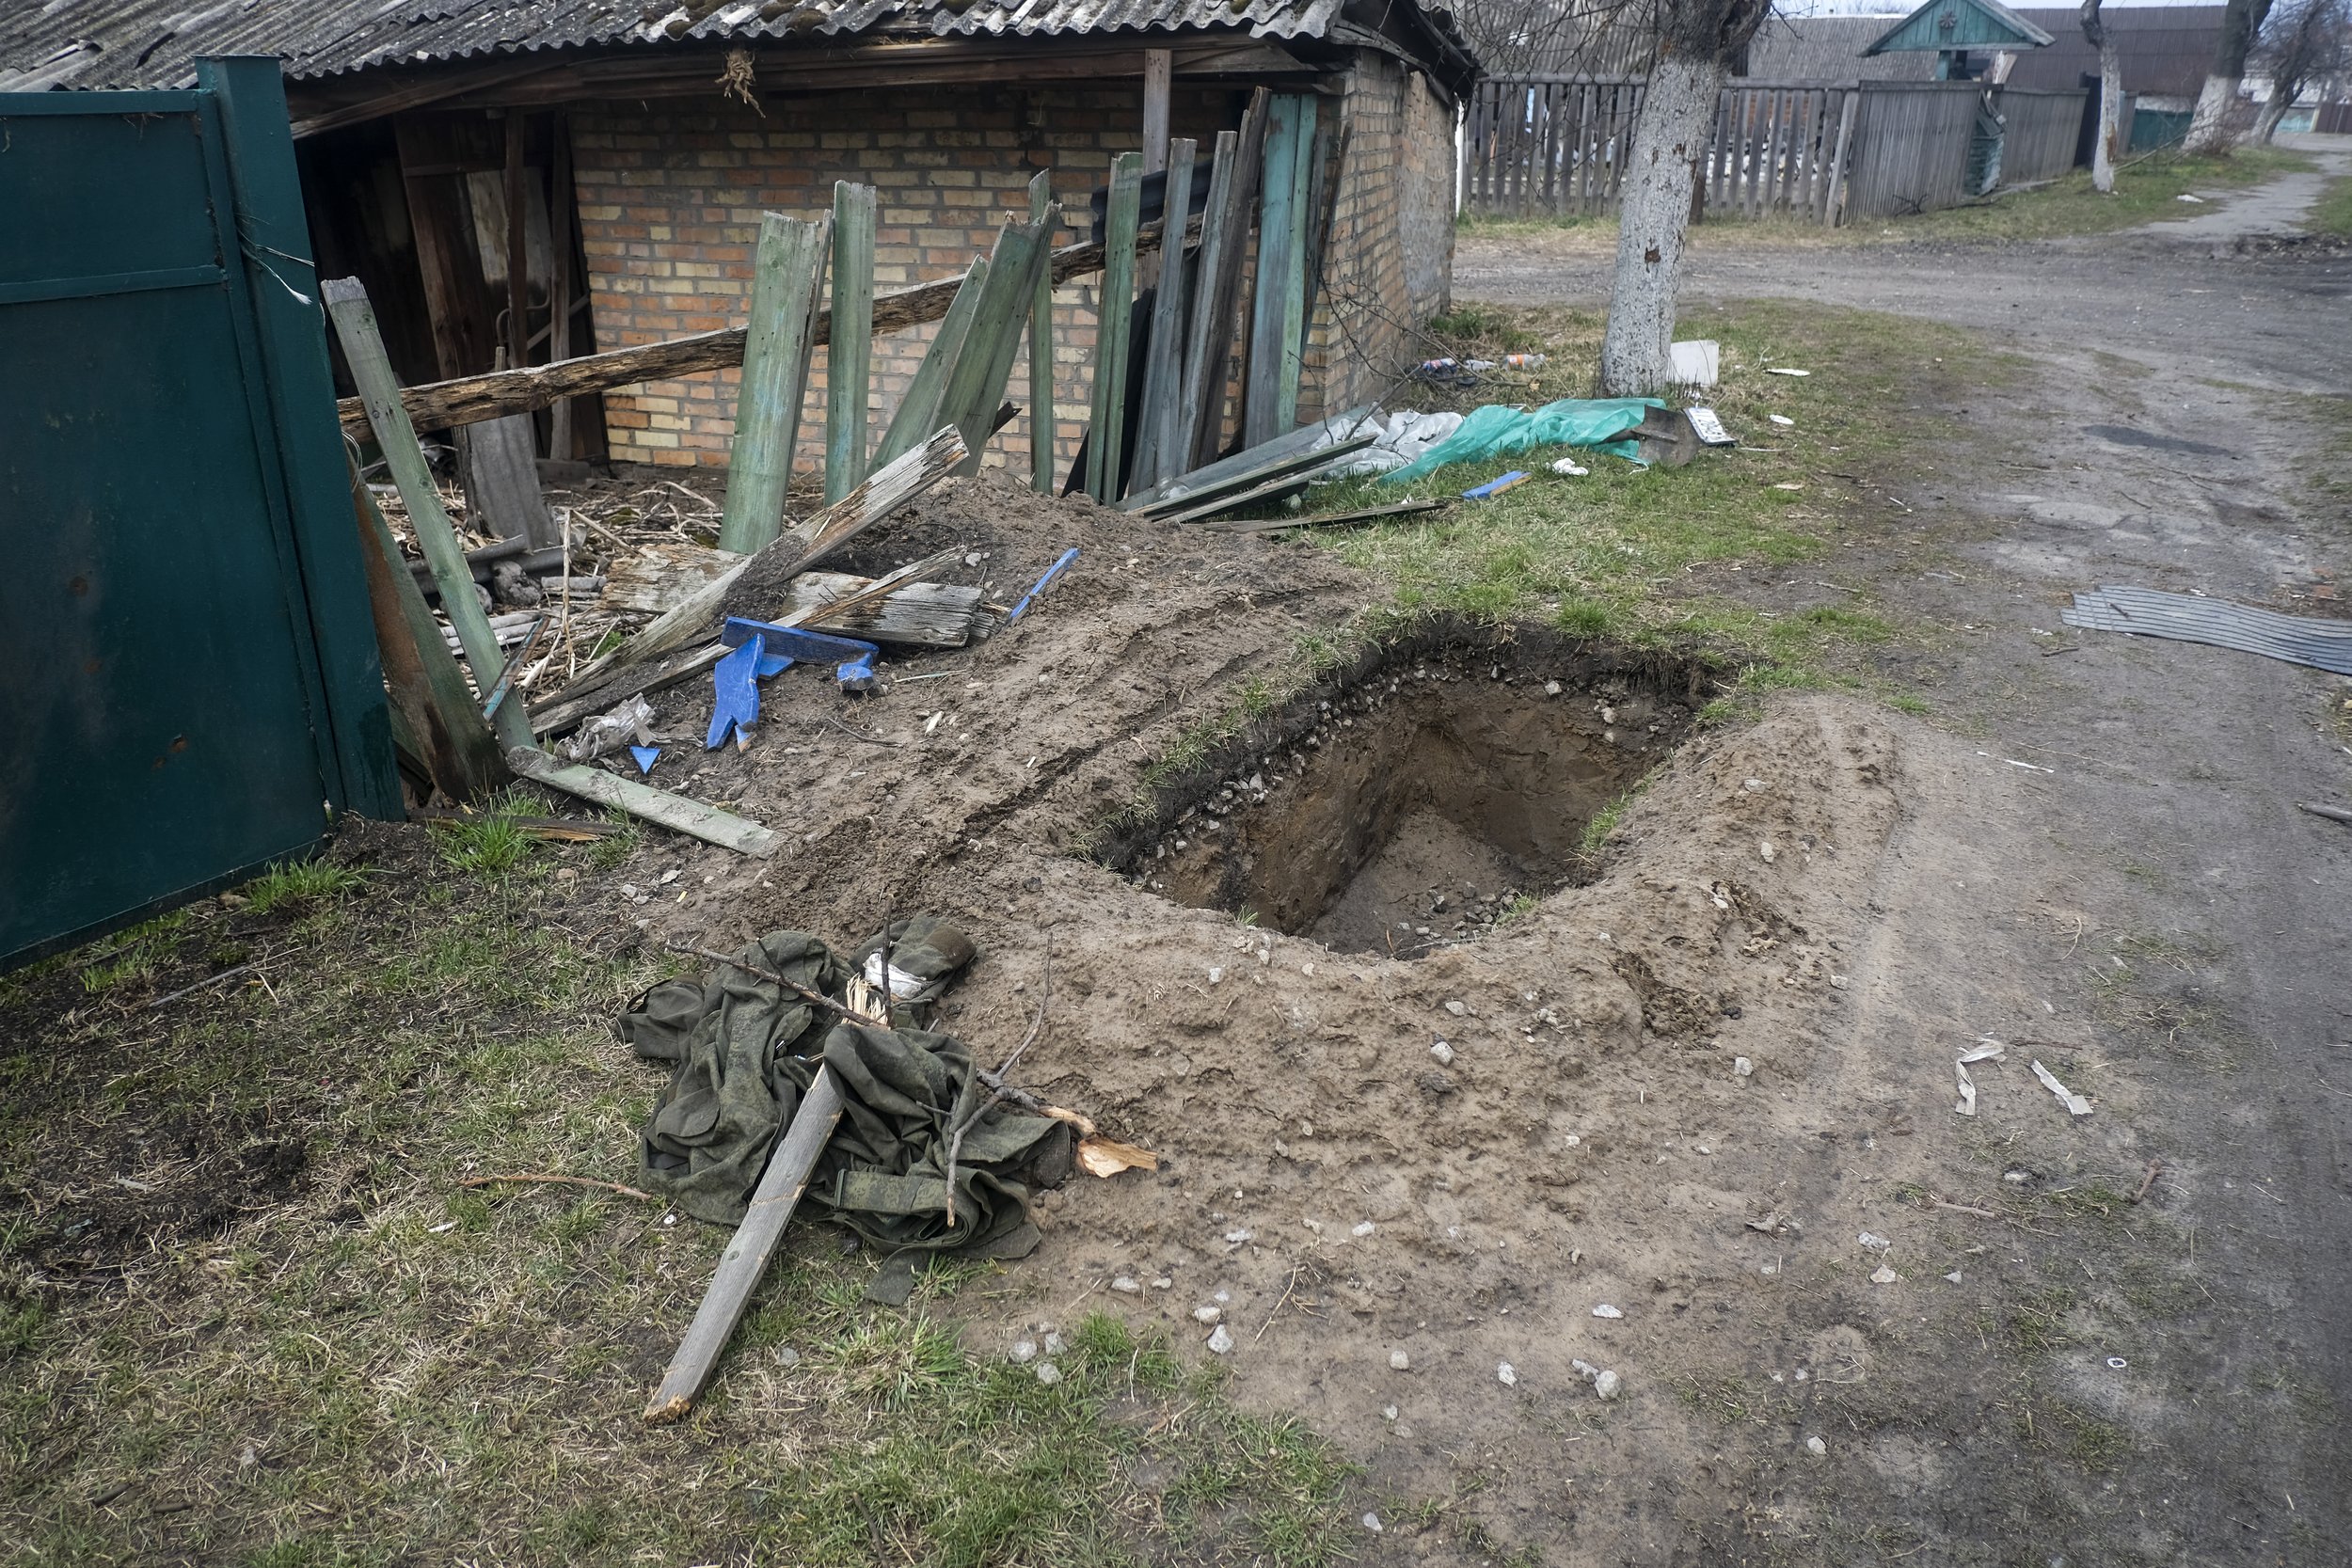  A makeshift grave dug for a Russian soldier killed during fighting near Demydiv, Ukraine on April 5, 2022. Heavy fighting occurred  in the suburbs surrounding Kyiv as Russian forces attempted to encircle the Ukrainian capital, fierce resistance from